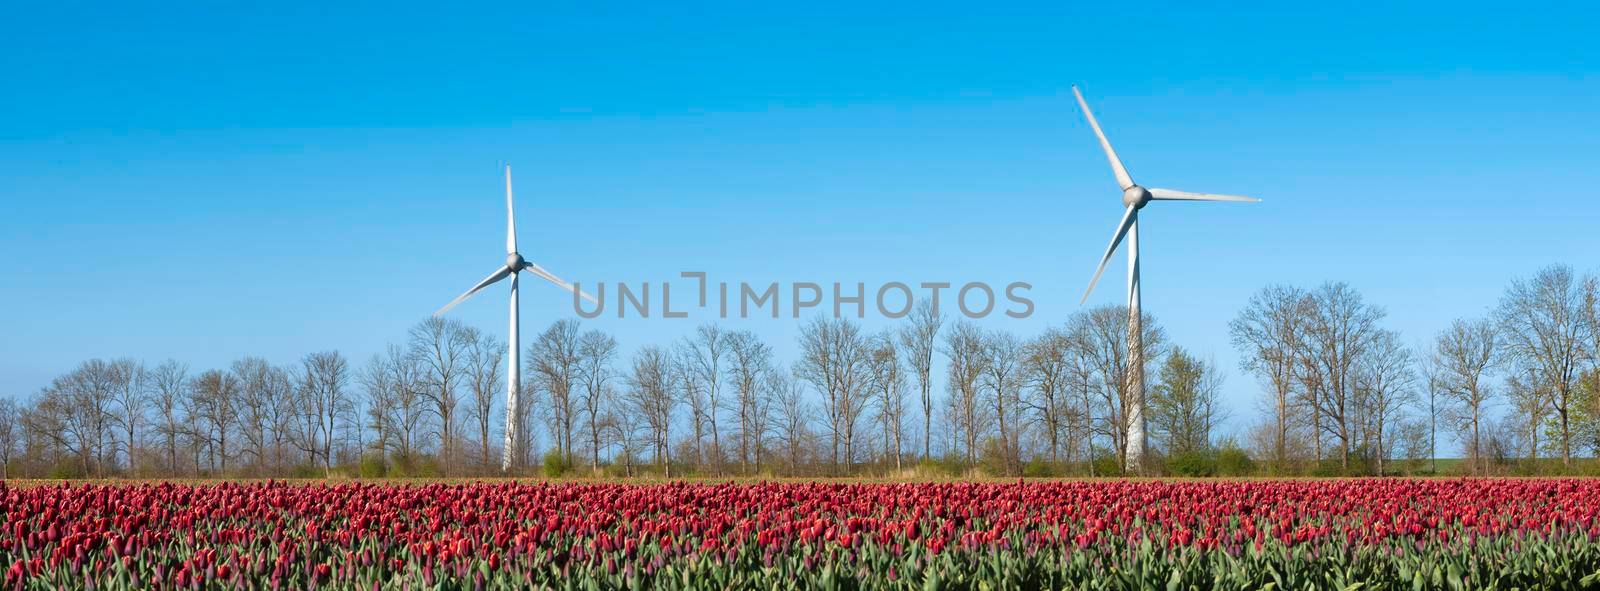 red tulip field and wind turbines under blue sky in the netherlands by ahavelaar